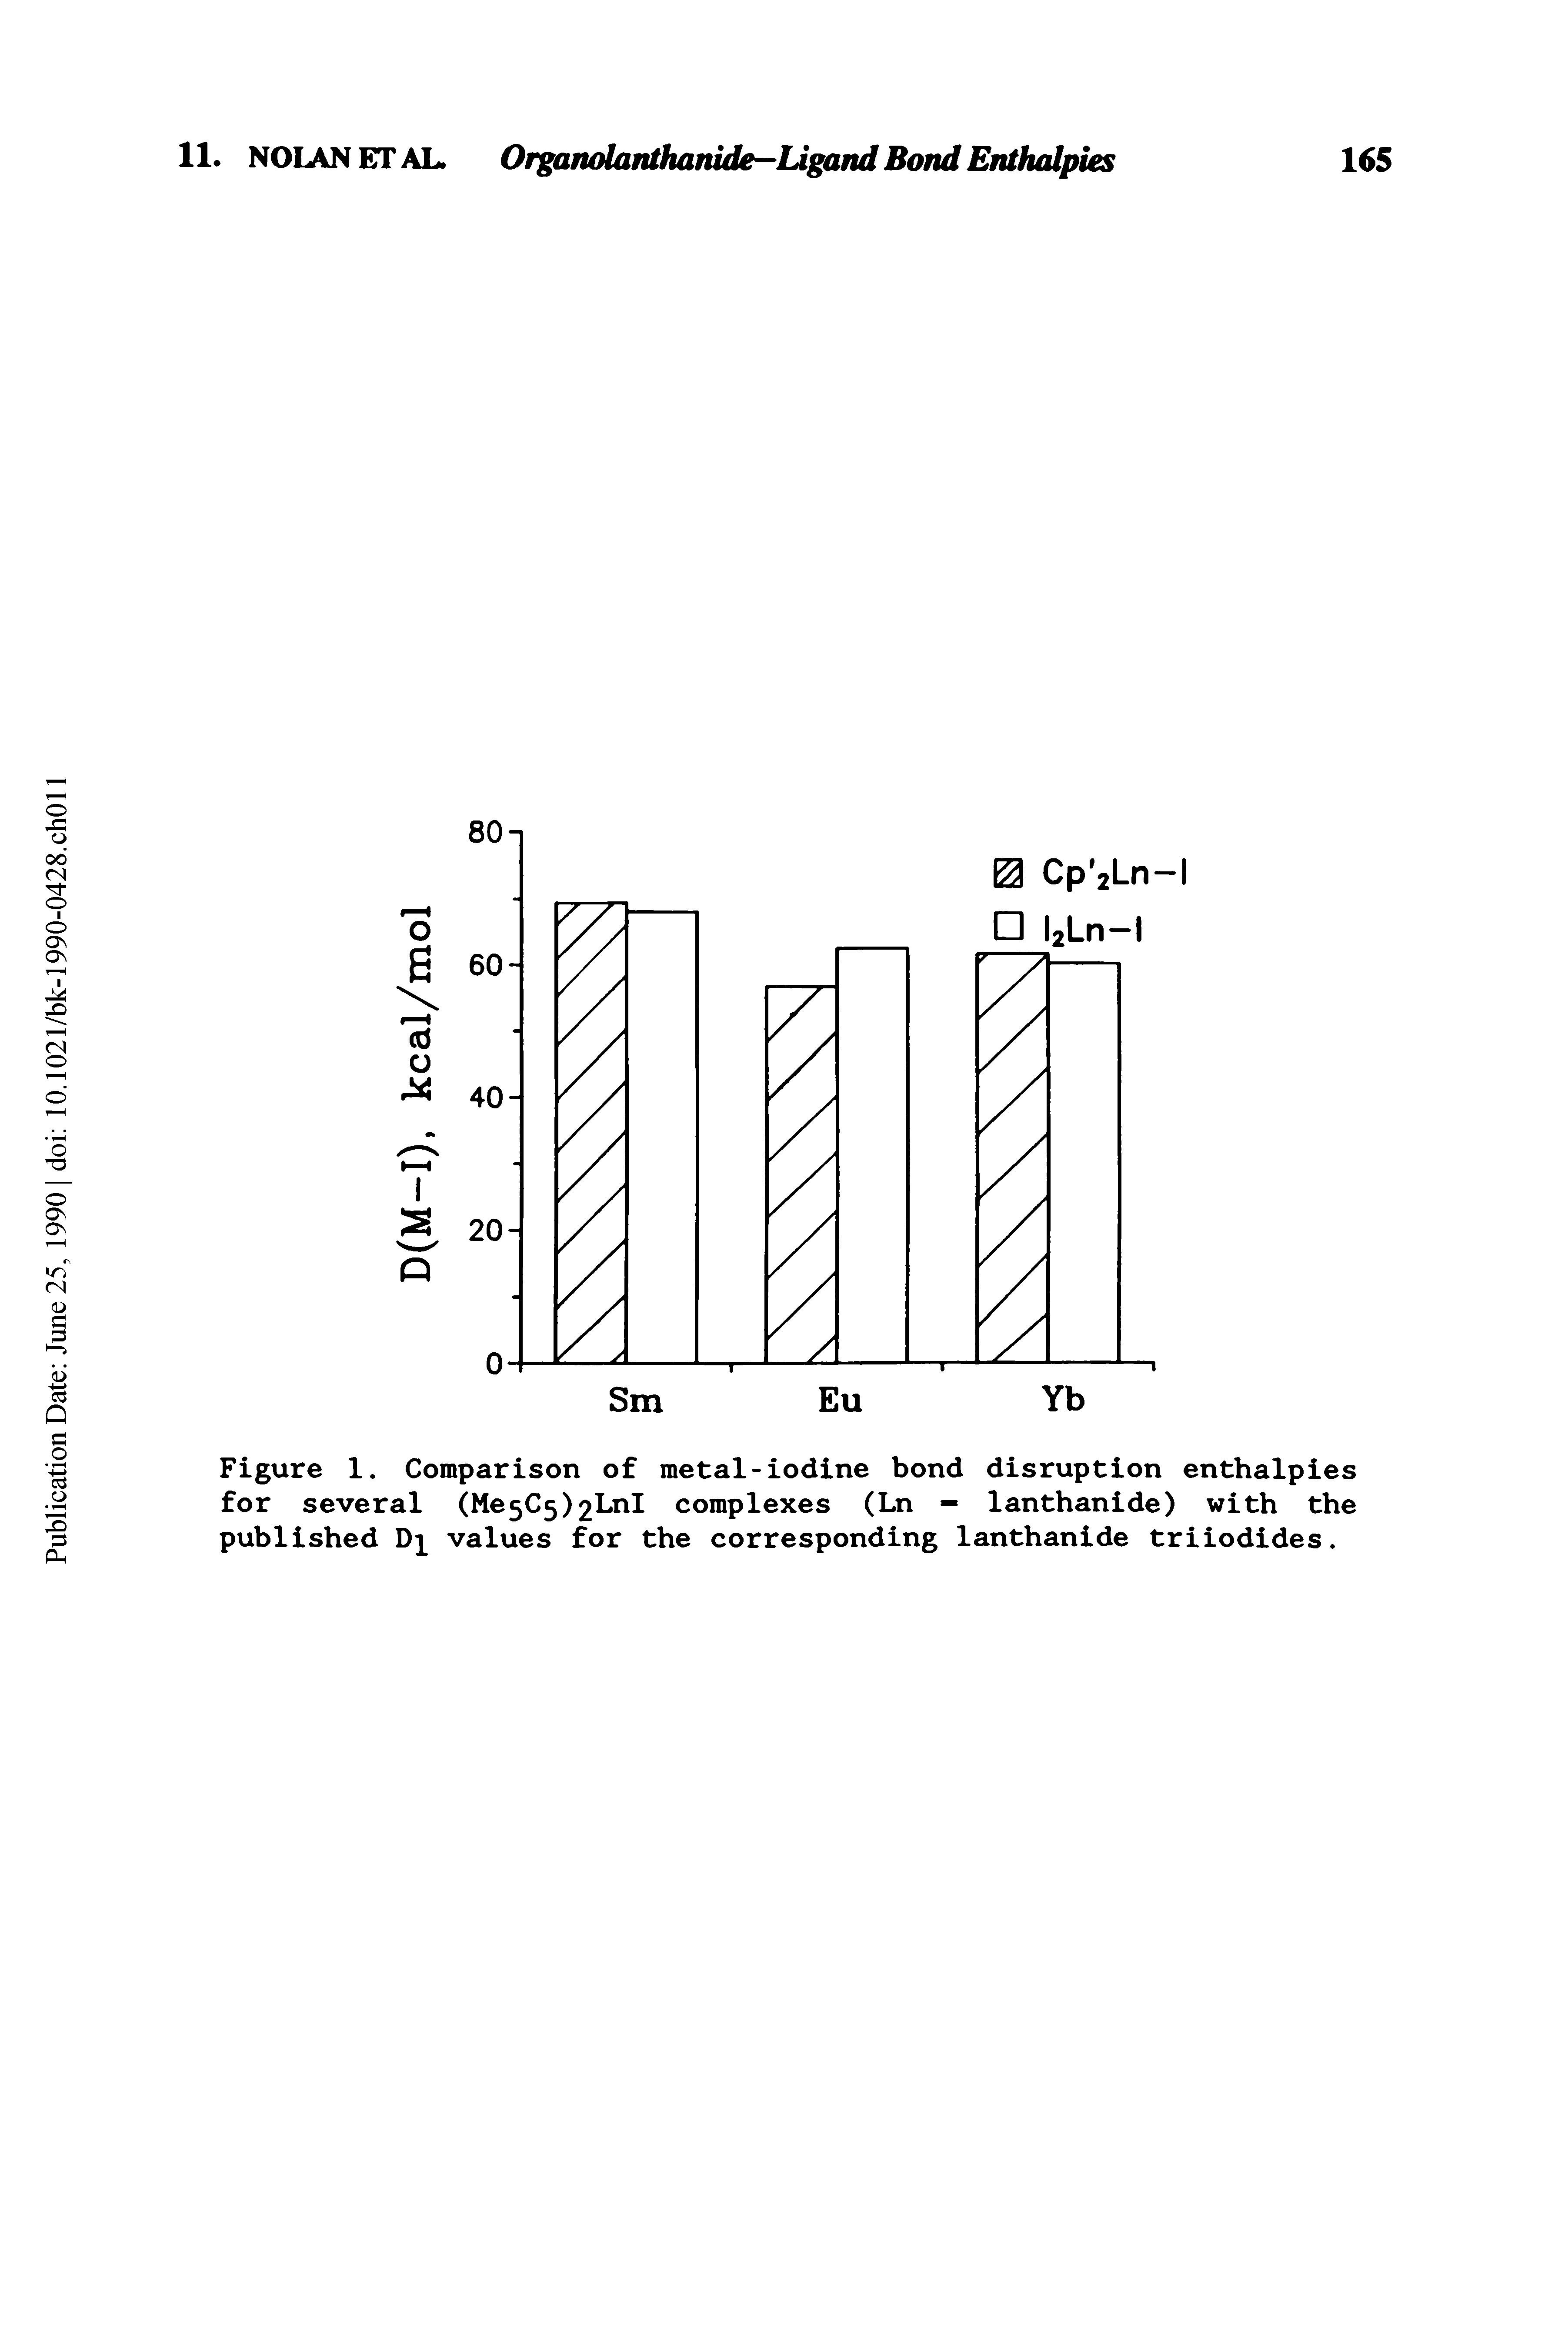 Figure 1. Comparison of metal-iodine bond disruption enthalpies for several (Me5C5)2LnI complexes (Ln - lanthanide) with the published values for the corresponding lanthanide triiodides.